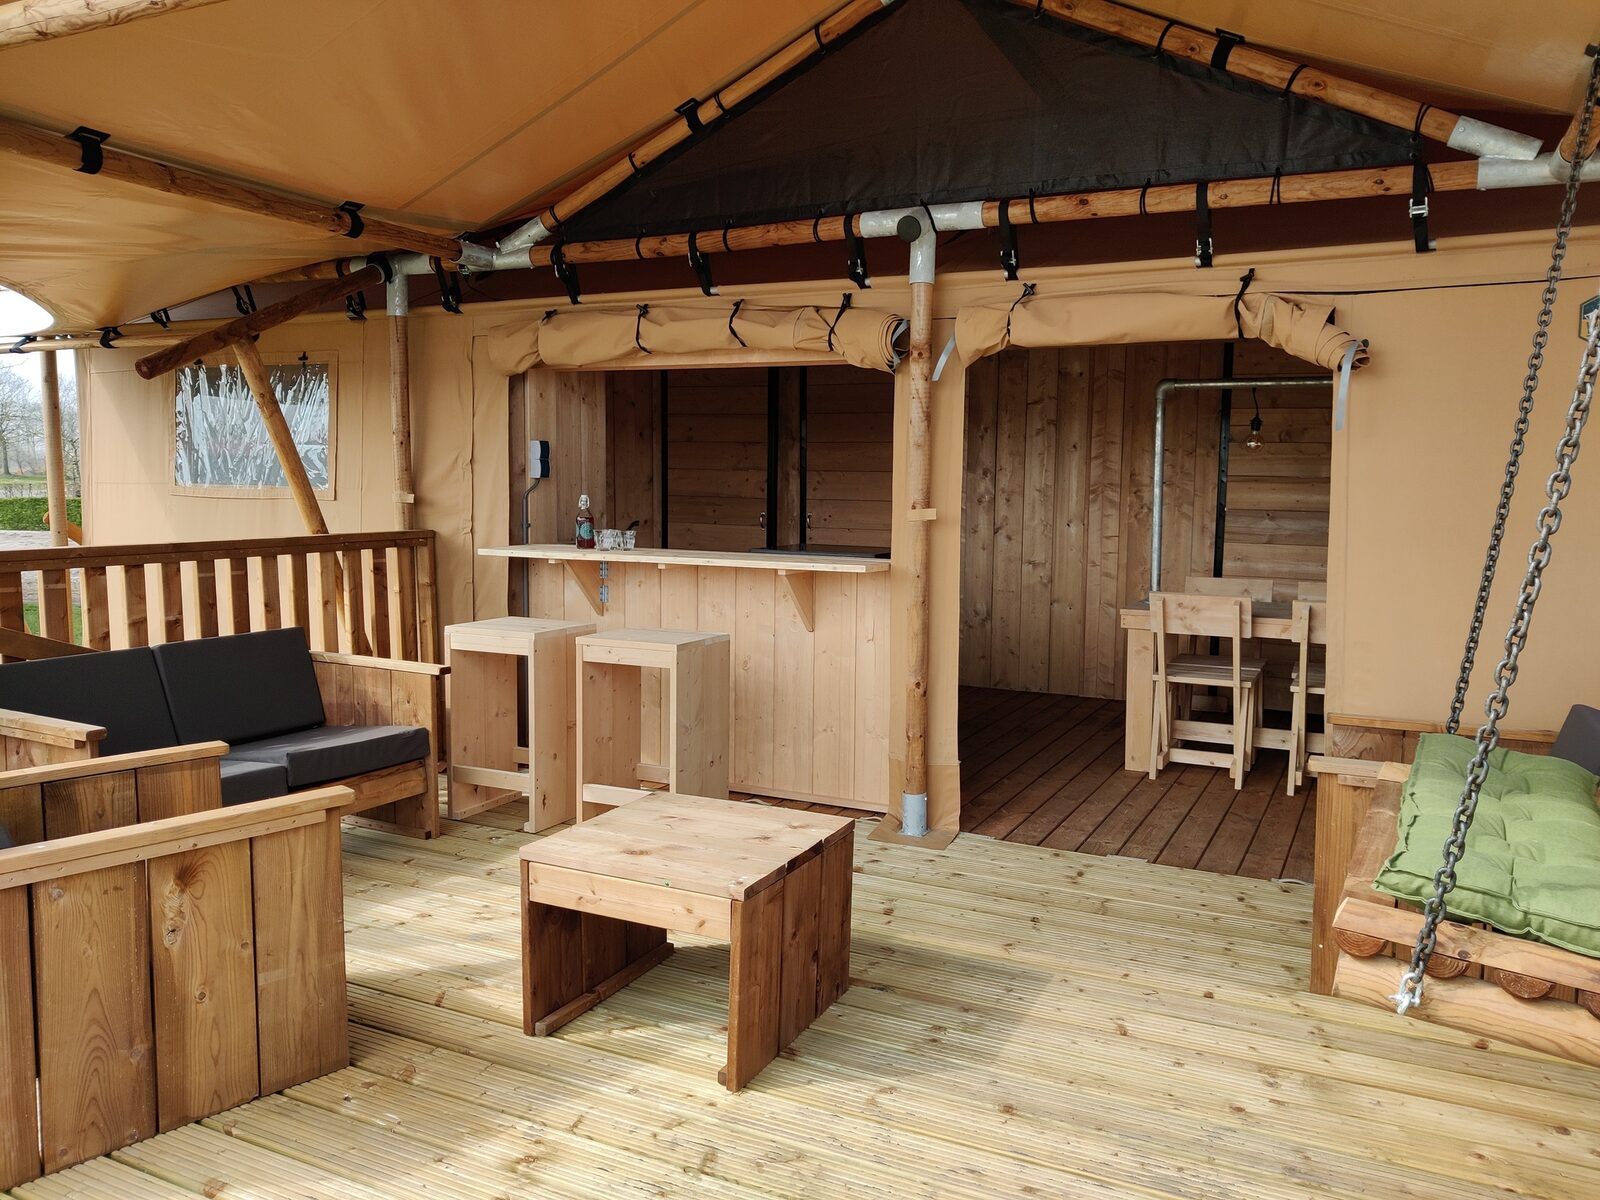 5-person glamping tent with airconditioning